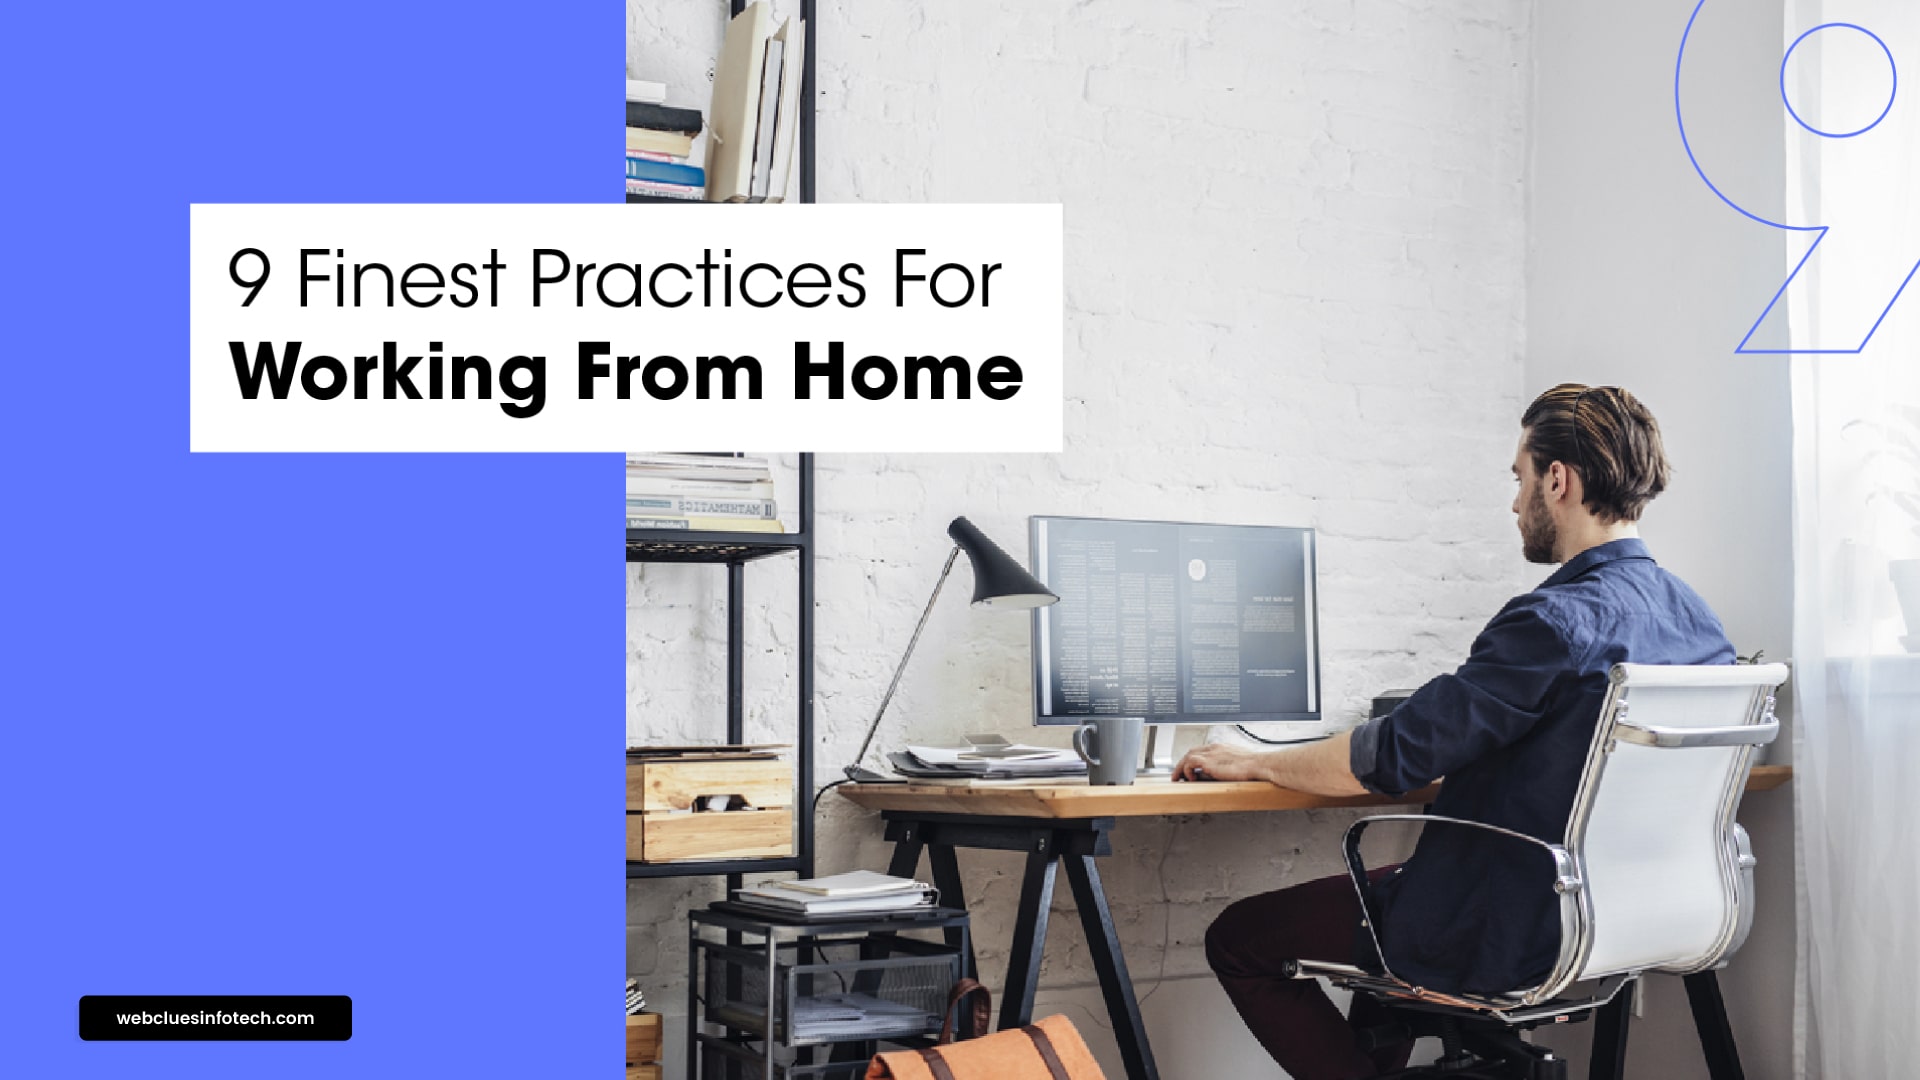 9 Finest Practices For Working From Home